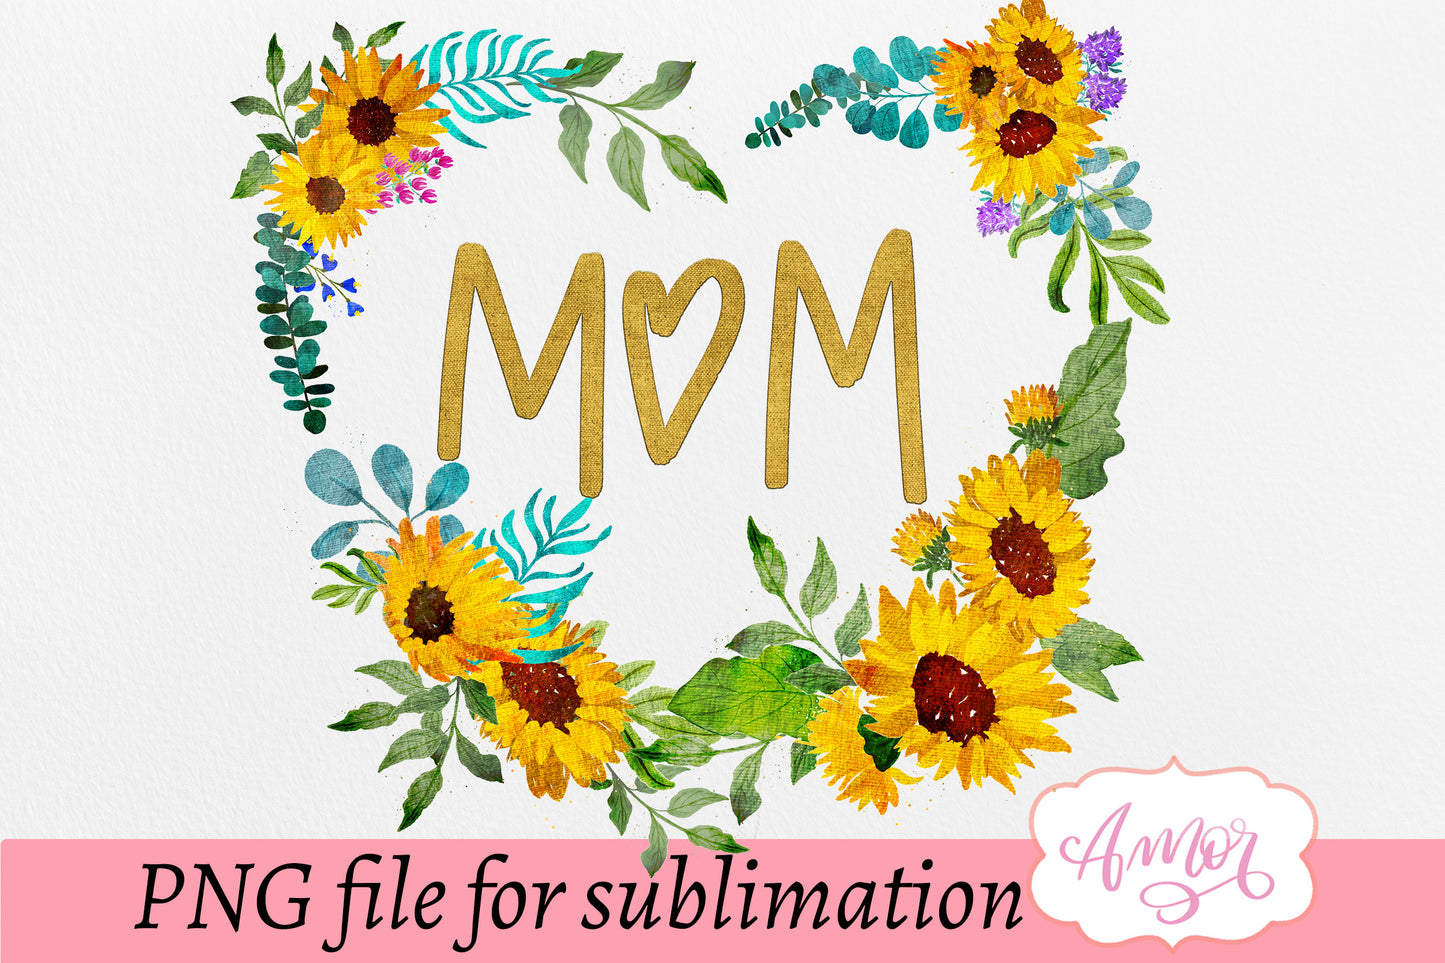 Mom design for T-shirt sublimation with a sunflowers wreath